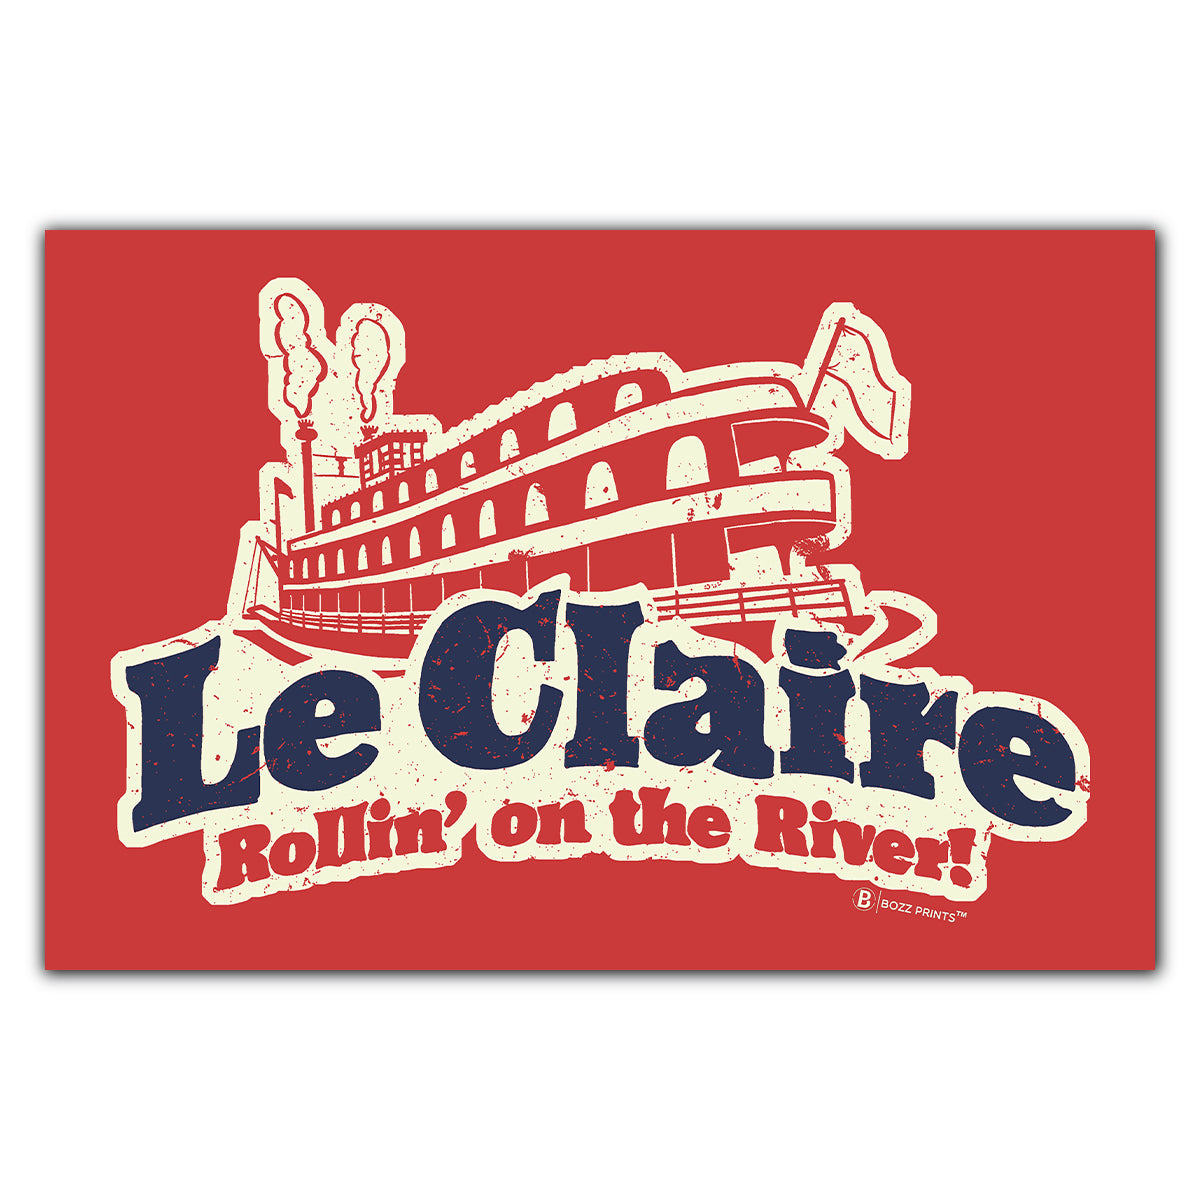 LeClaire Rollin' on the River Postcard